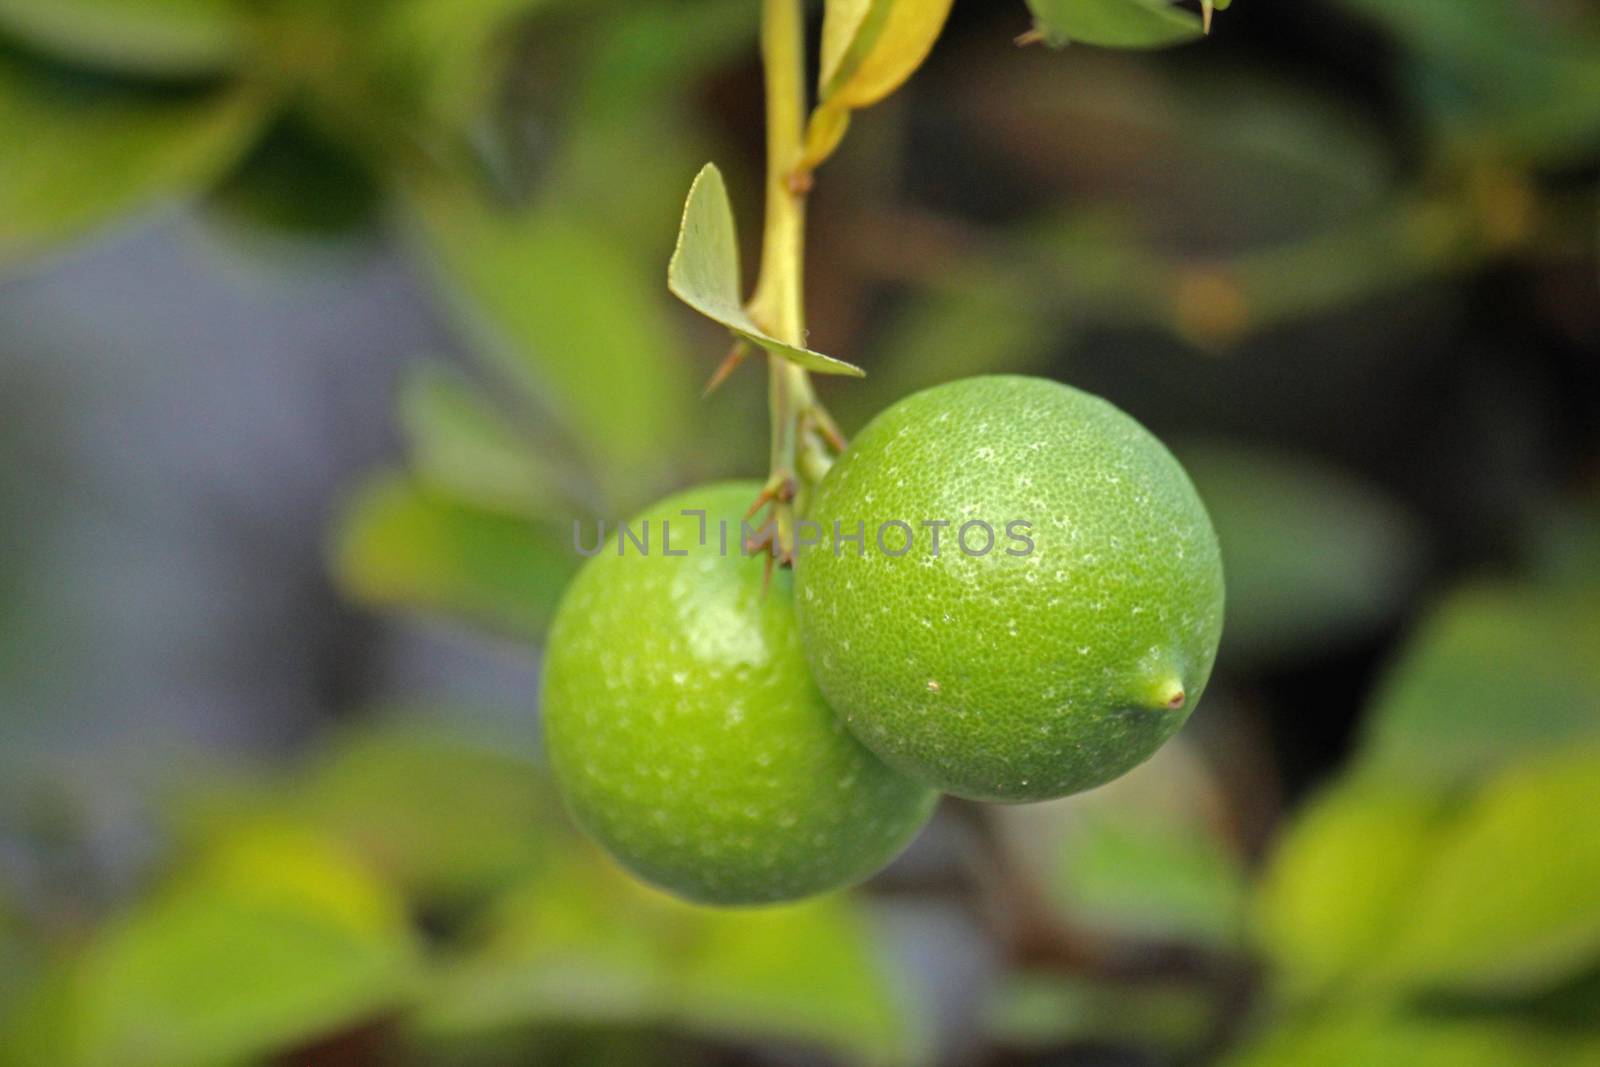 The lemon, Citrus �� limon, C. limon is a small evergreen tree native to Asia. The tree's ellipsoidal yellow fruit is used for culinary and non-culinary purposes throughout the world, primarily for its juice